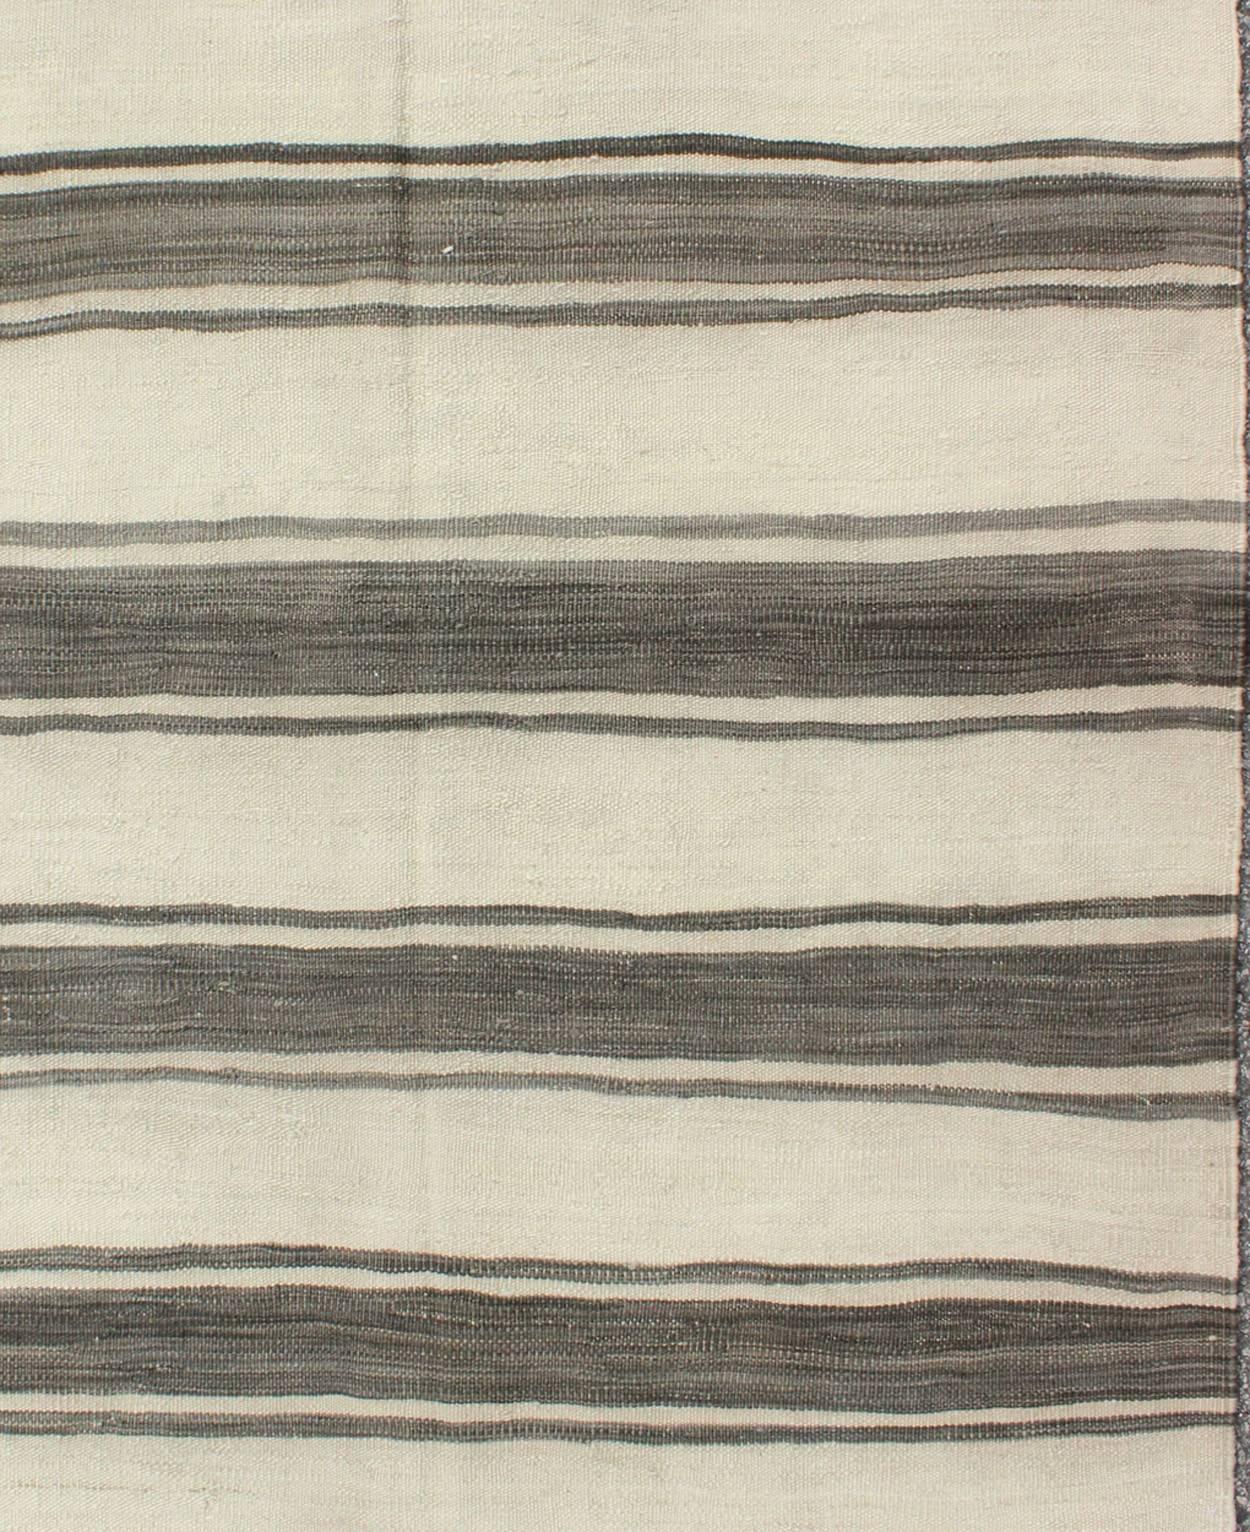 Vintage Turkish Kilim Rug with Horizontal Gray Stripes and a Modern Design In Excellent Condition For Sale In Atlanta, GA